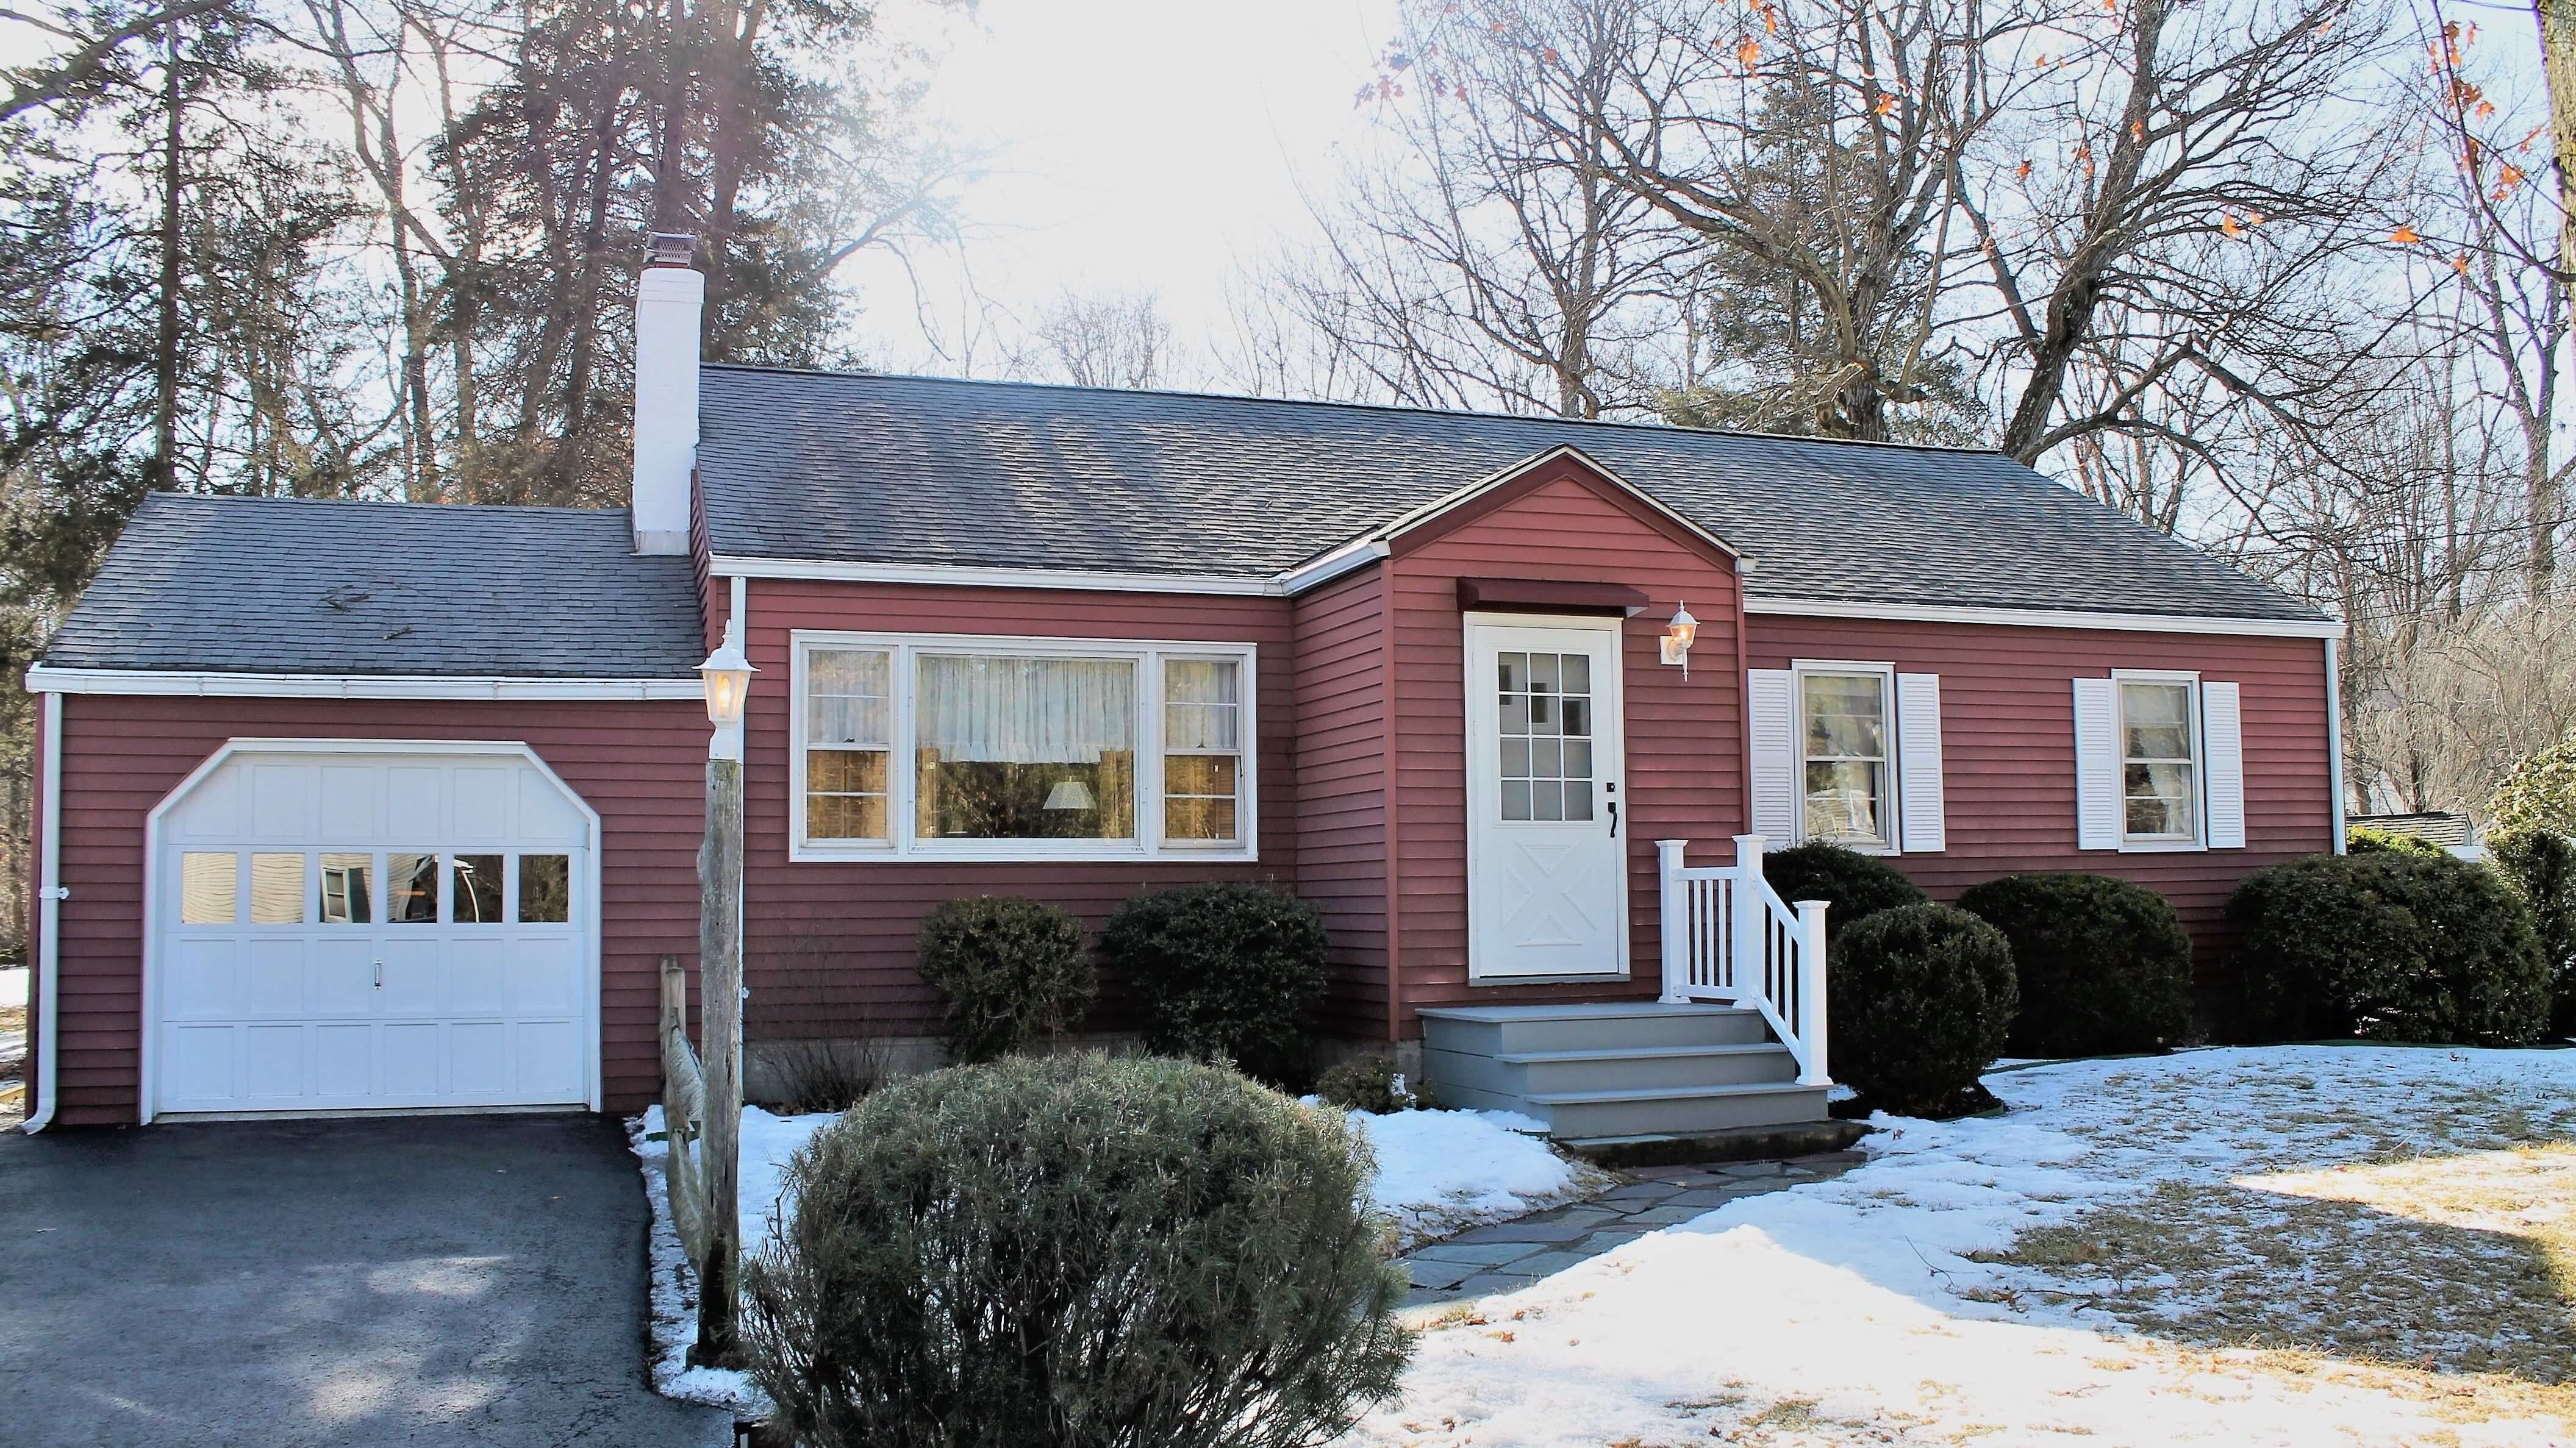 upstate homes for sale cape cod style valley stream poughkeepsie